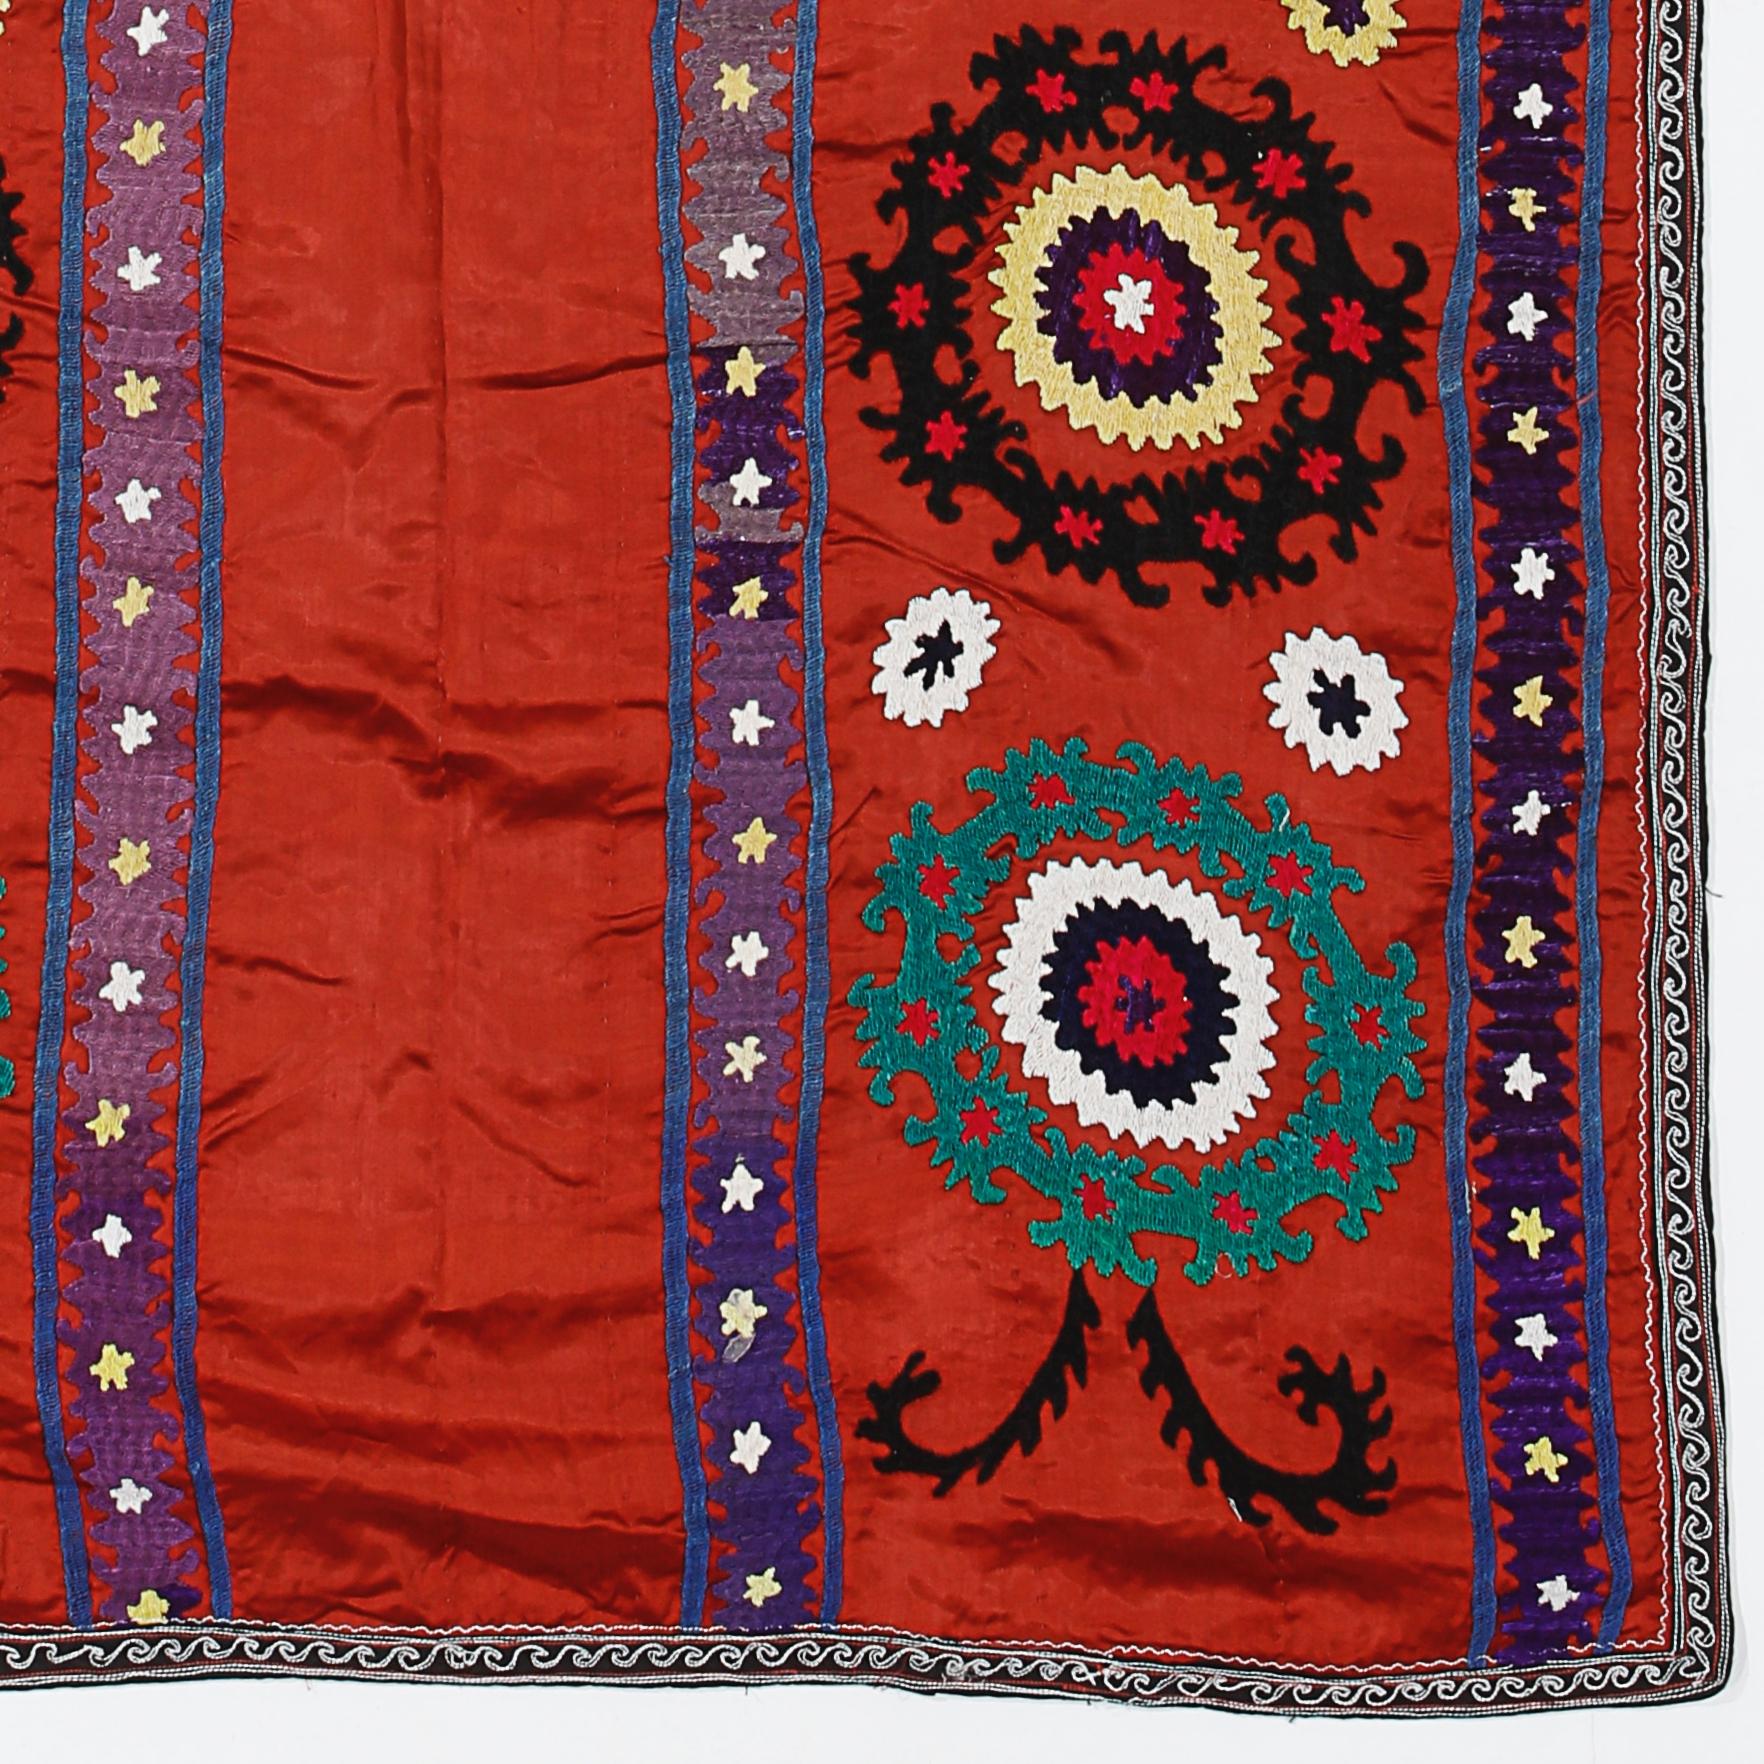 Embroidered 3.2x5.3 Ft Tashkent Suzani Textile Wall Hanging, Red Silk Embroidery Table Cover For Sale